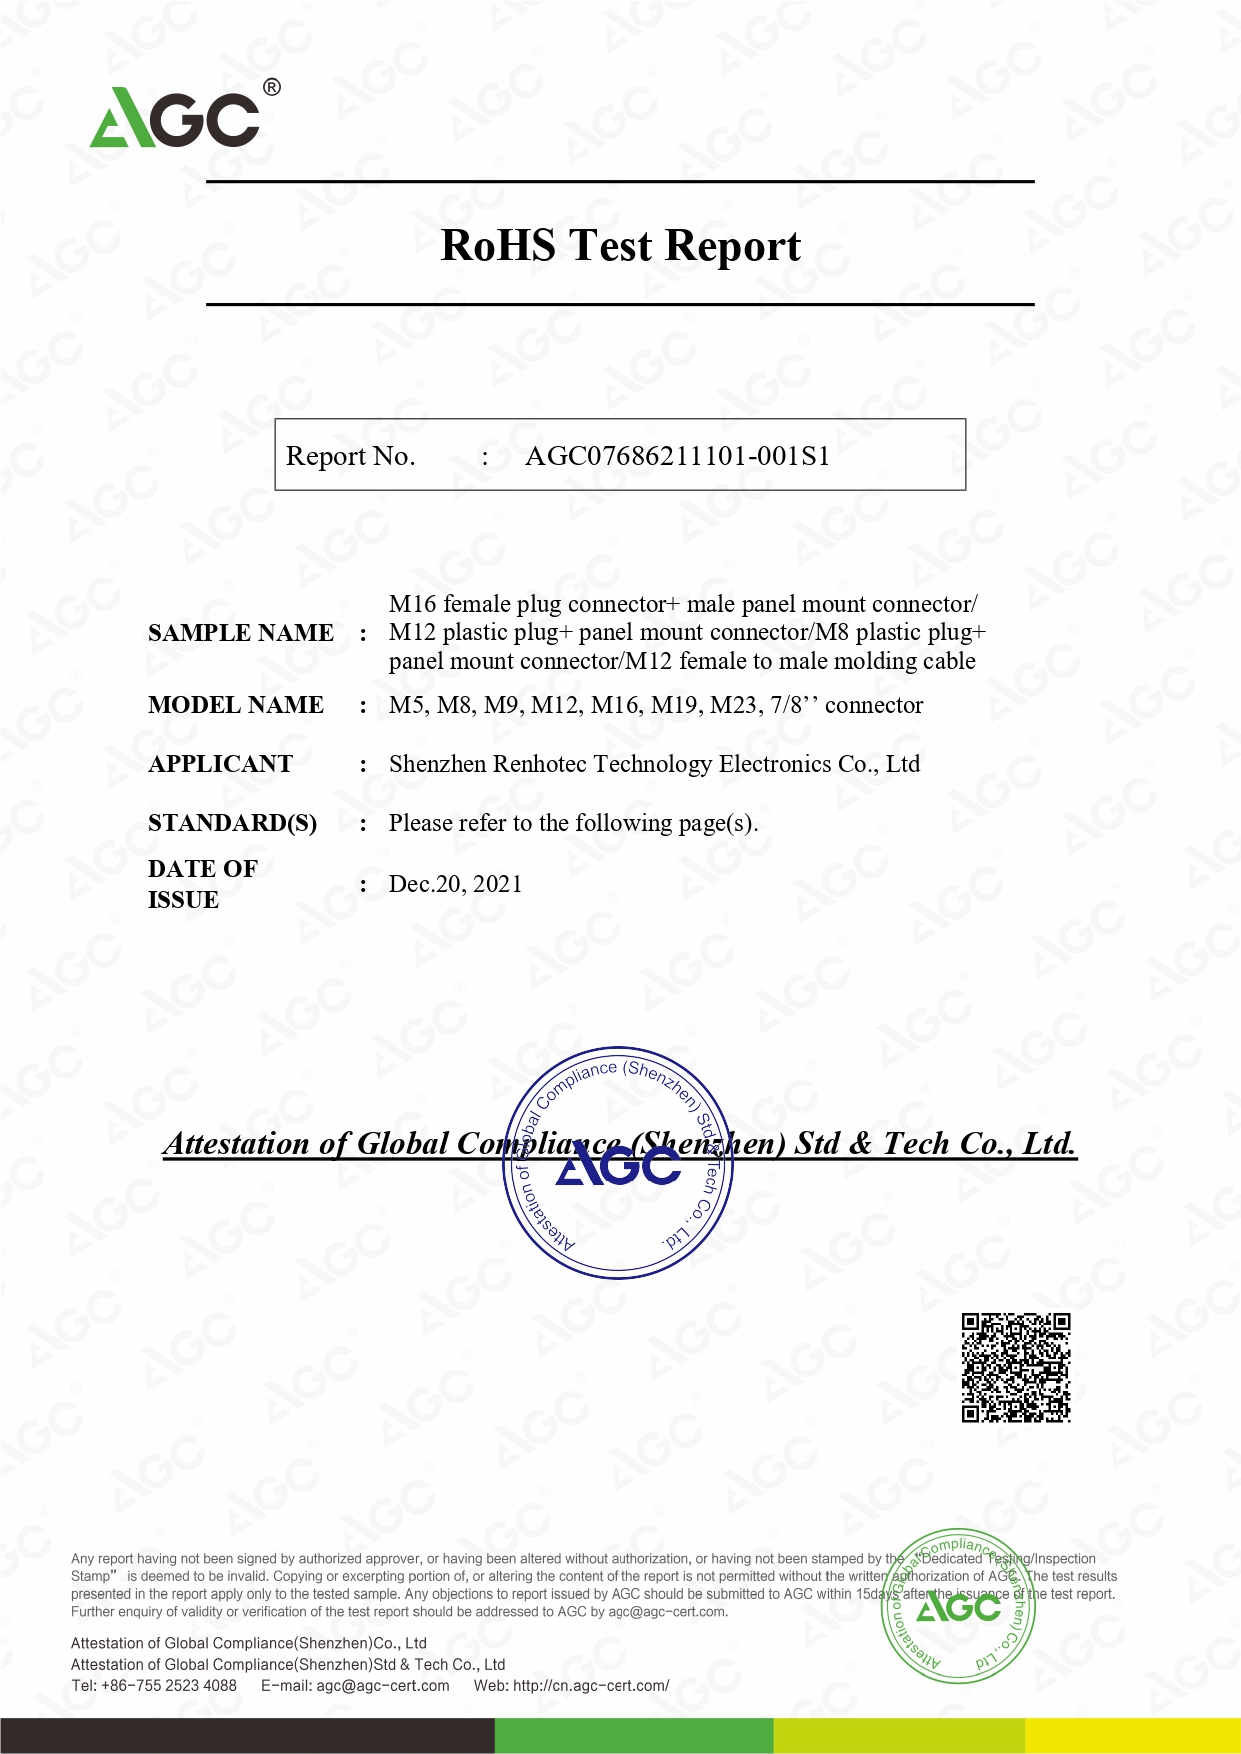 AGC07686211101-001S1 ROHS Test Report - M12 M8 M16 connector